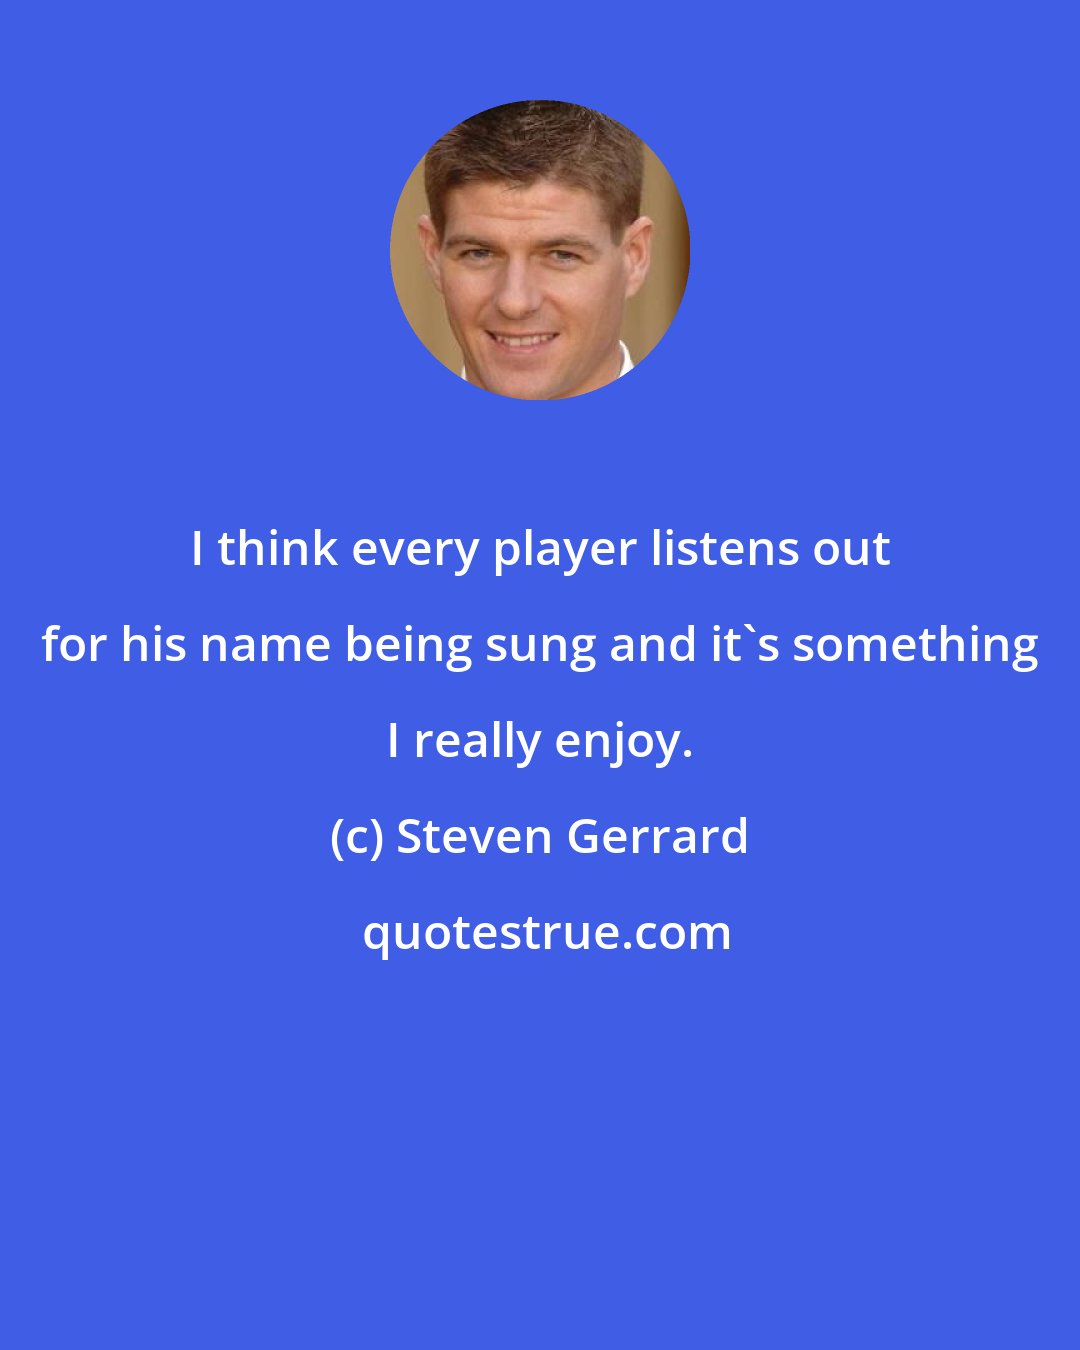 Steven Gerrard: I think every player listens out for his name being sung and it's something I really enjoy.